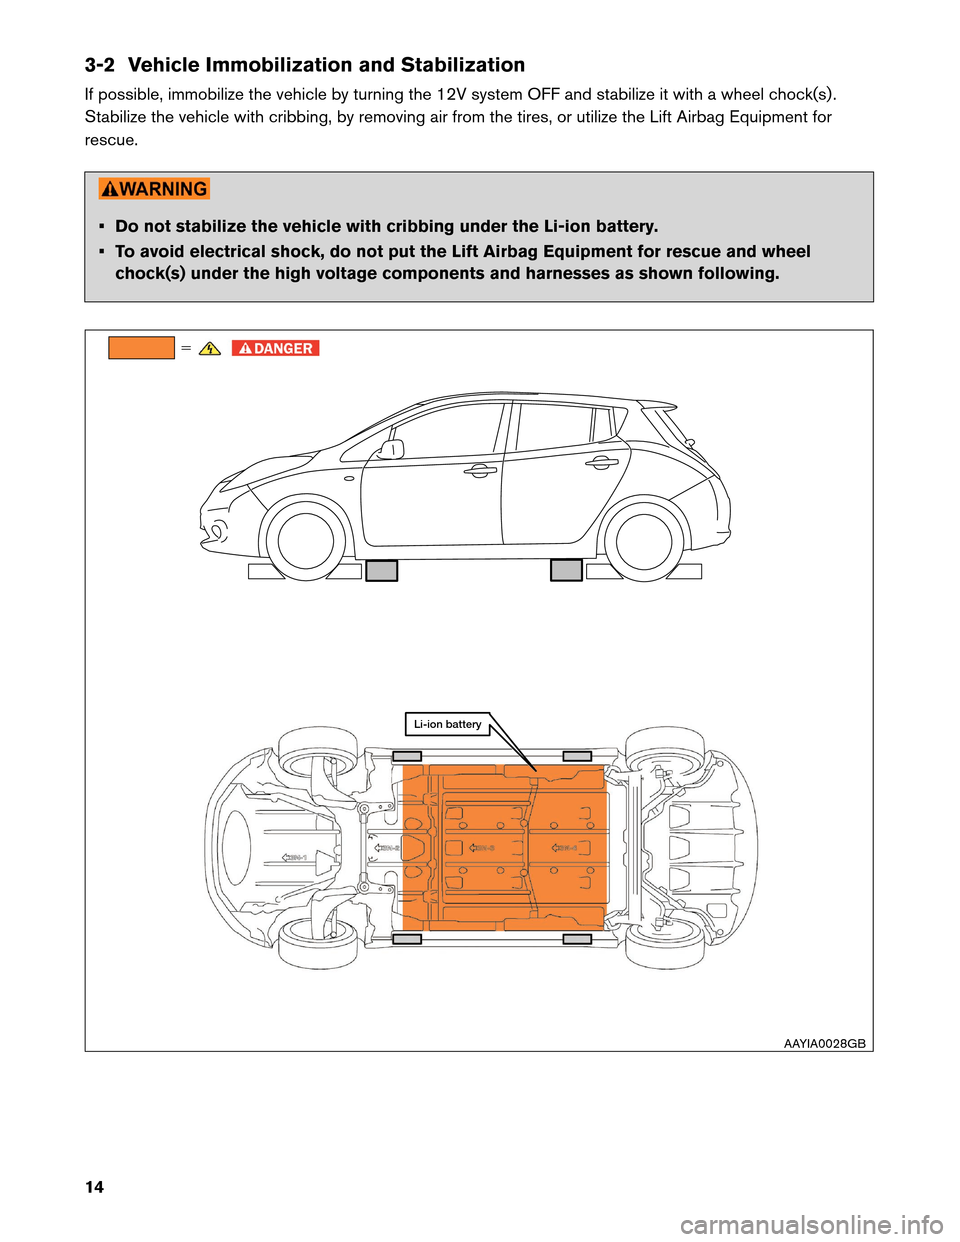 NISSAN LEAF 2013 1.G First Responders Guide 3-2 Vehicle Immobilization and Stabilization
If
possible, immobilize the vehicle by turning the 12V system OFF and stabilize it with a wheel chock(s) .
Stabilize the vehicle with cribbing, by removing